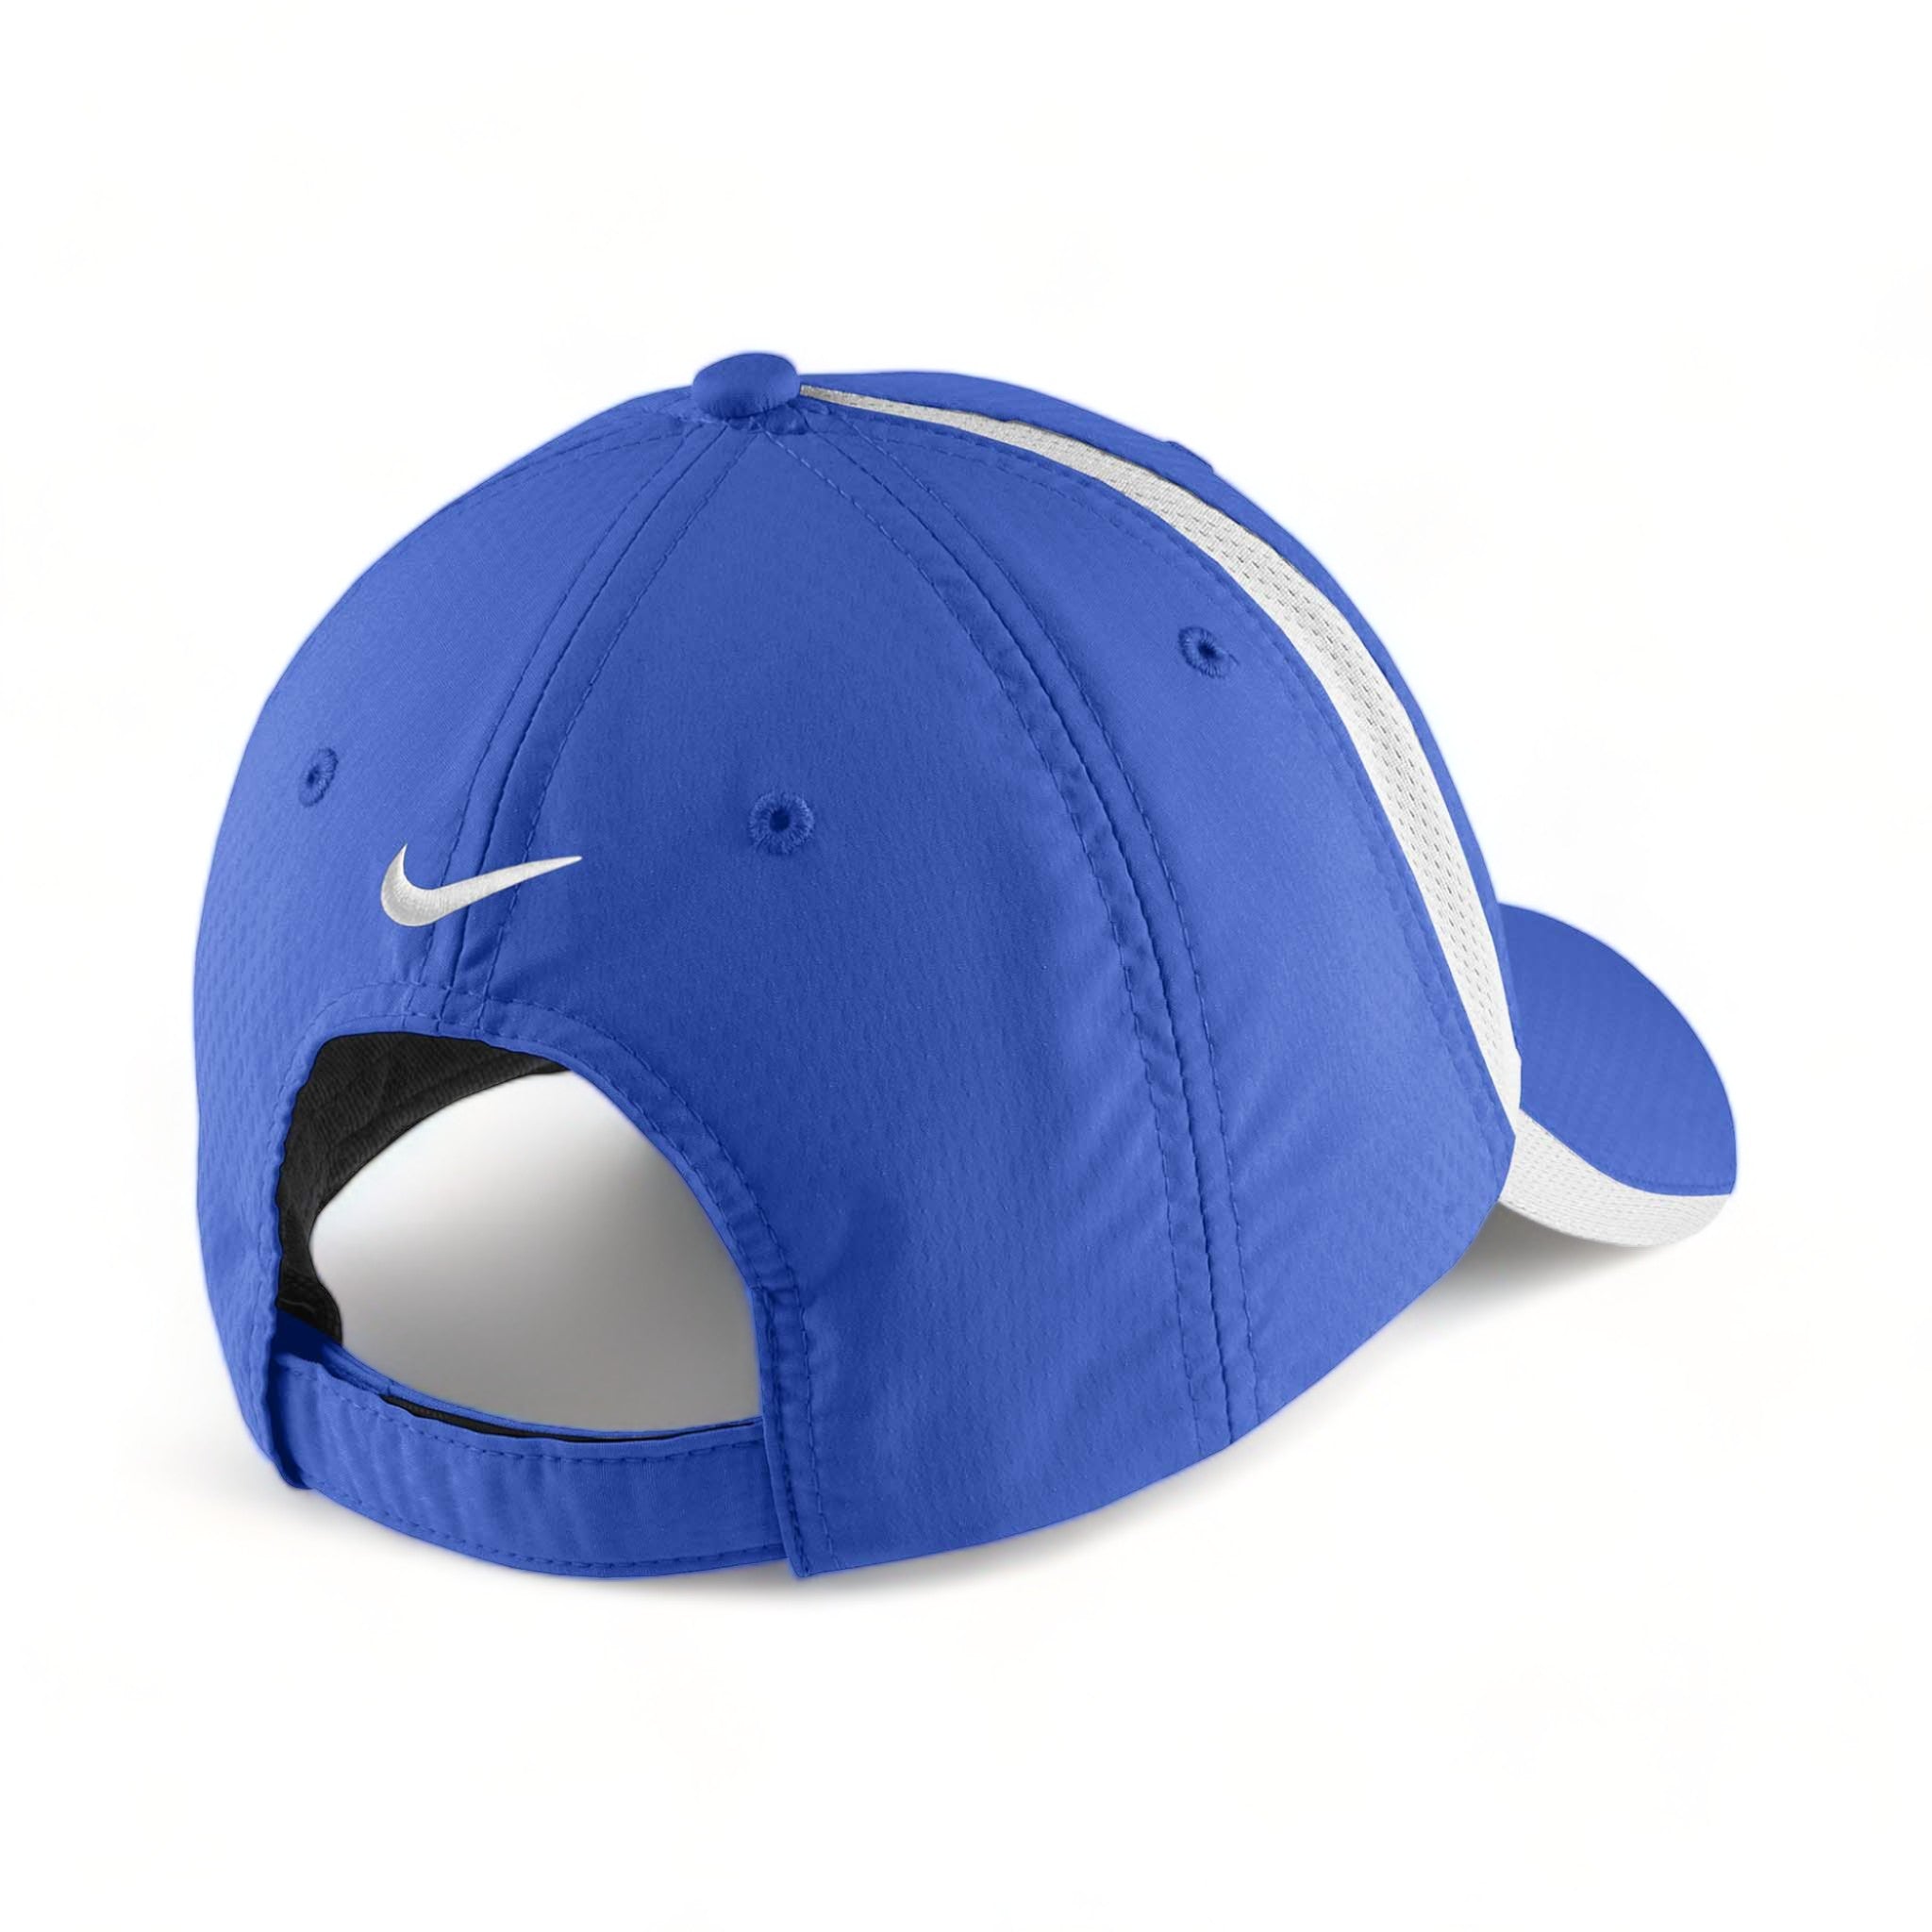 Back view of Nike NKFD9709 custom hat in game royal and white